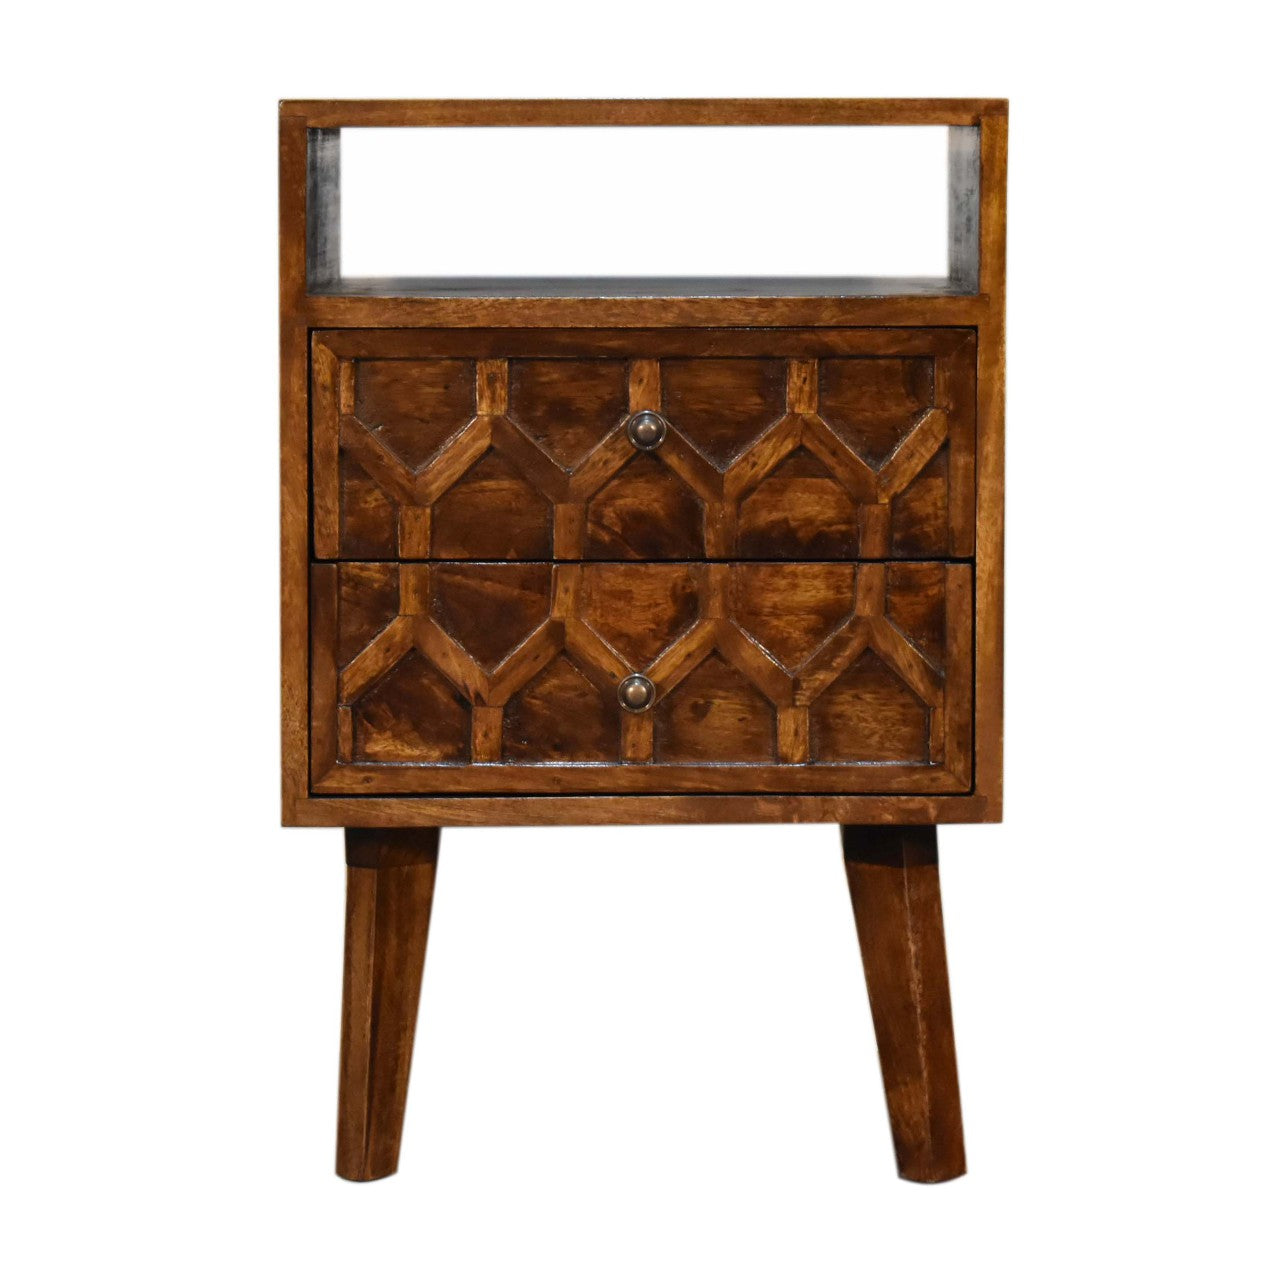 Amouri Bedside Table 2 Drawer Chest in Chestnut Finish Over SOlid Mango Wood - CasaFenix